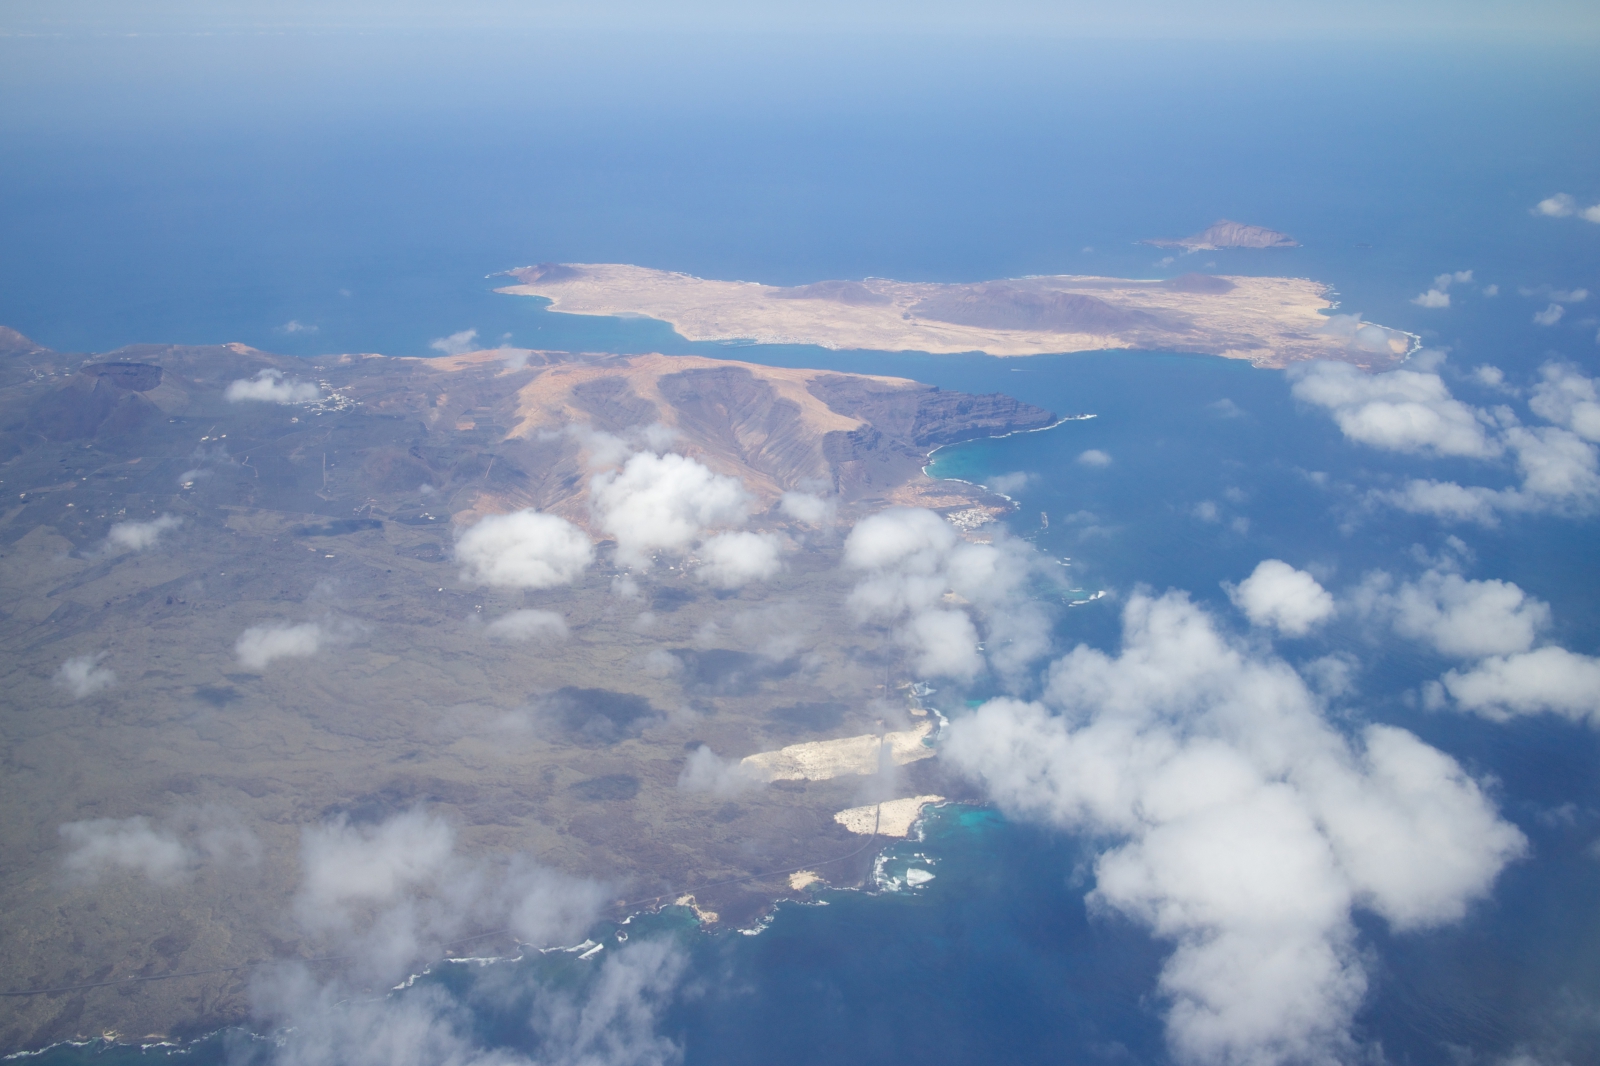 'View on Lanzarote island from an airplane' - Lanzarote